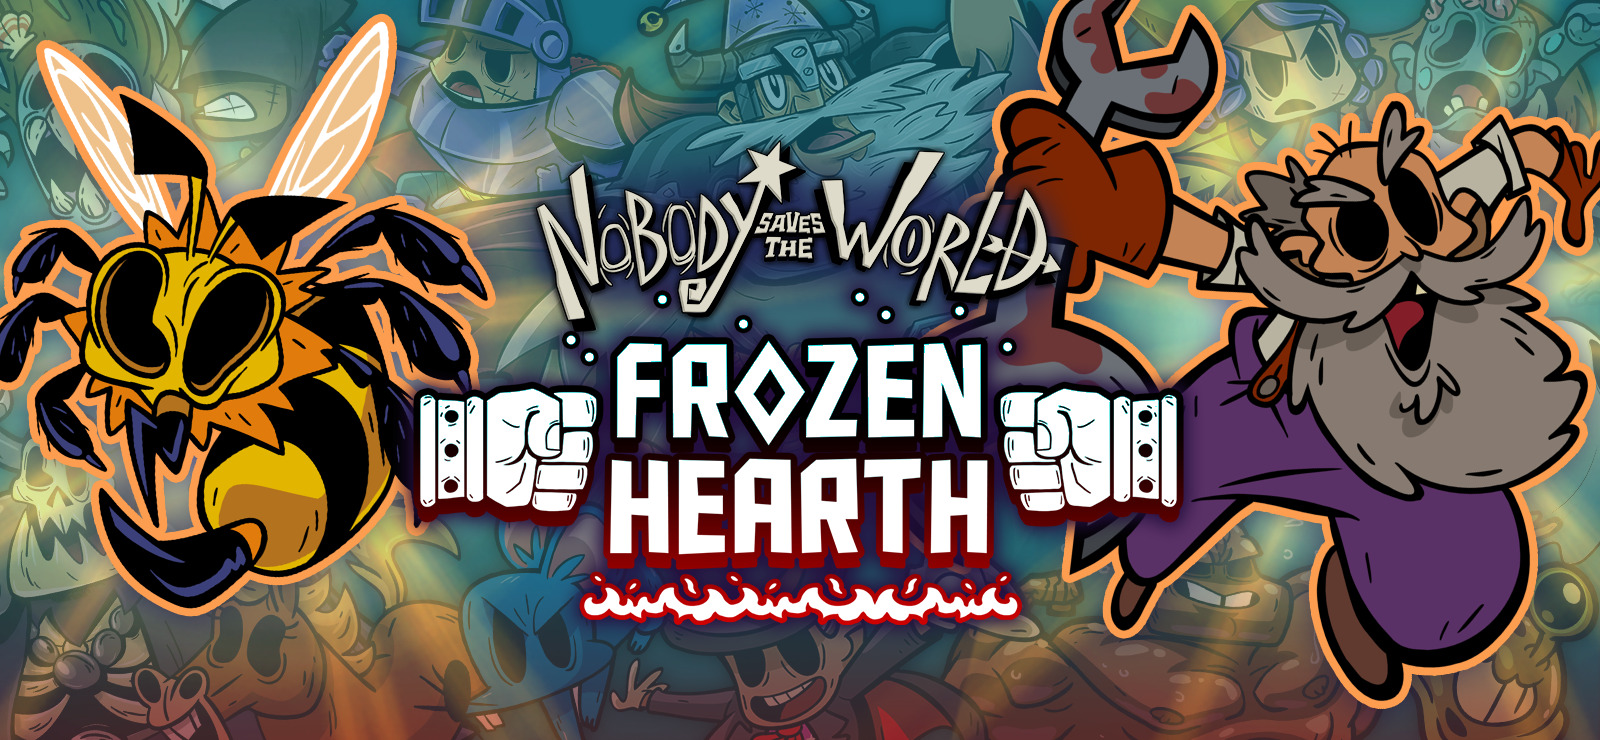 Download Nobody Saves the World Frozen Hearth-GOG